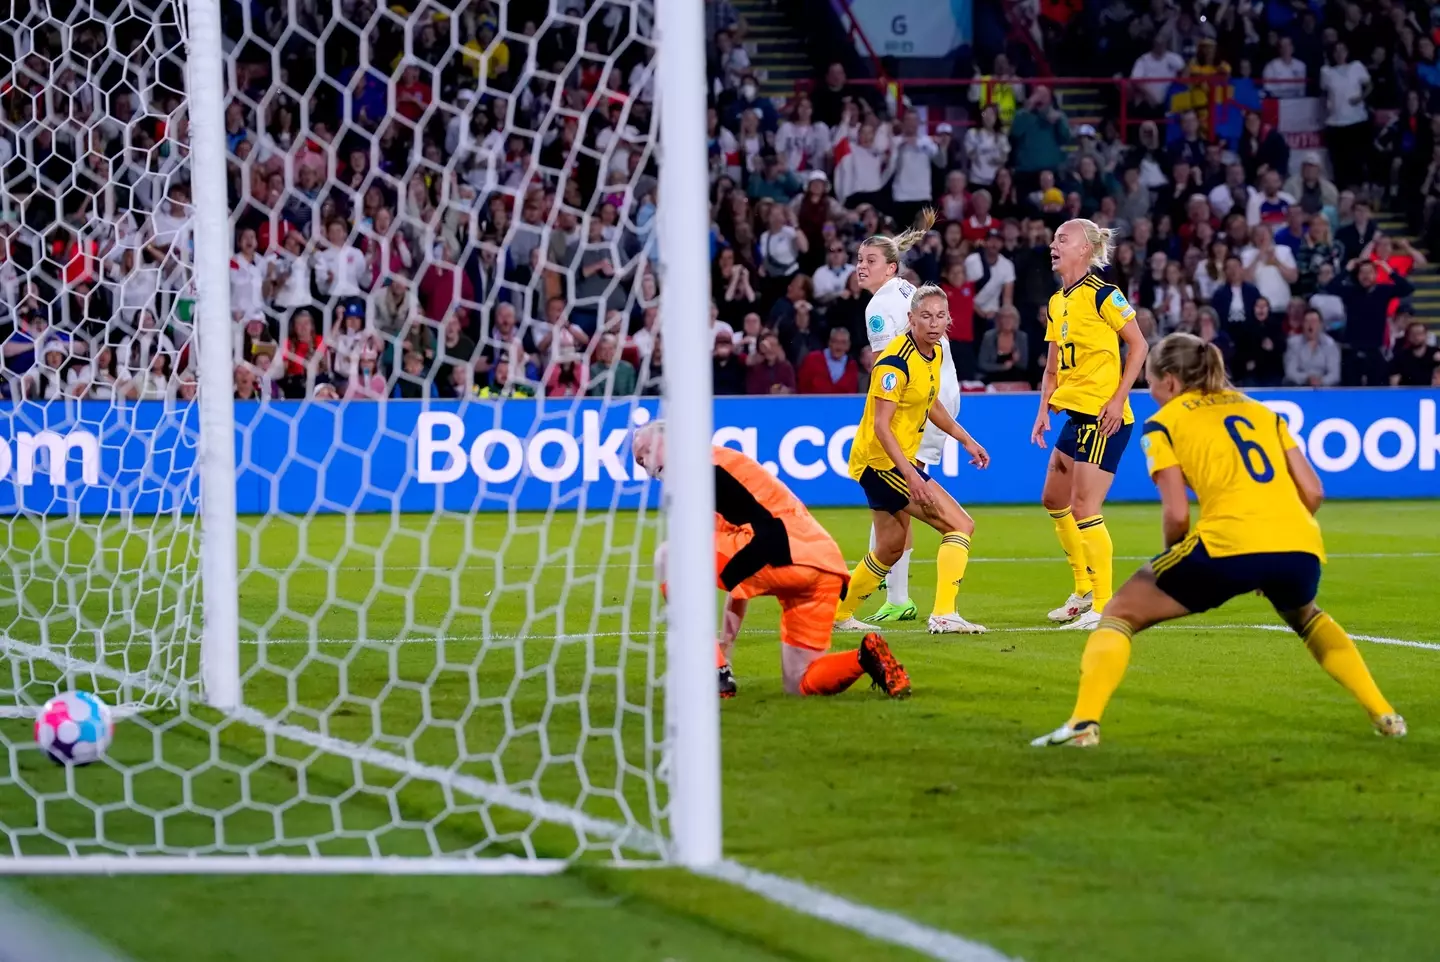 Russo scored four goals for England at Euro 2022 (Image: Alamy)